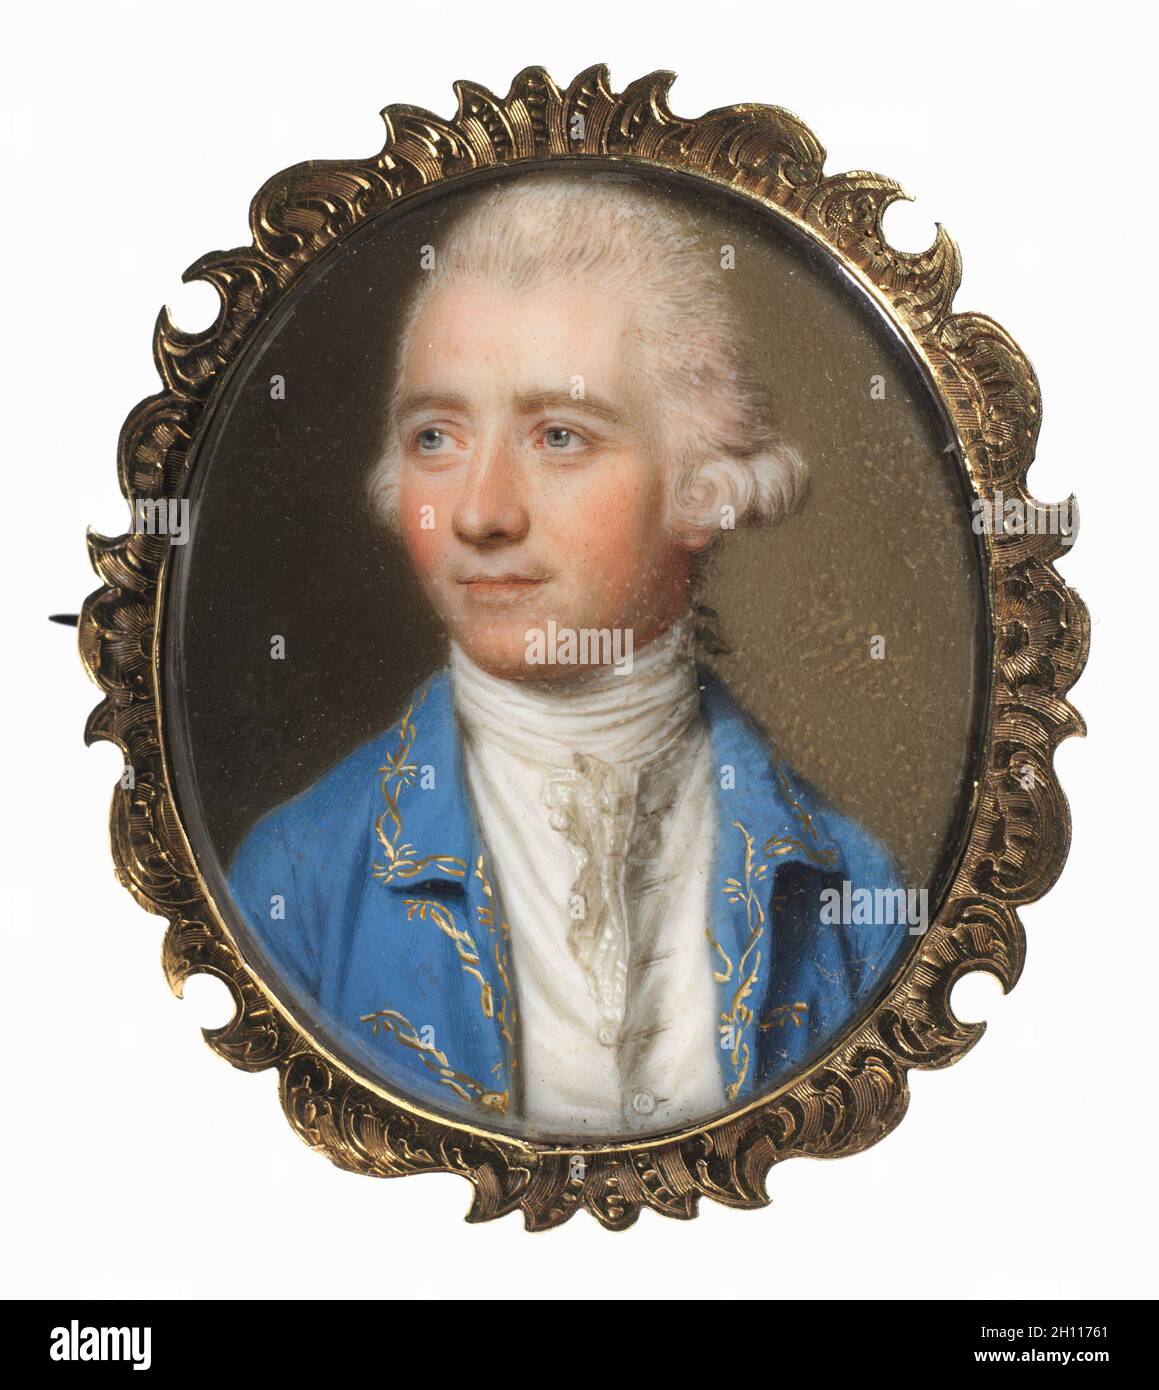 Portrait of a Man, Possibly Sir Soulden Lawrence, 1770. John I Smart (British, 1741-1811). Watercolor on ivory in an amalgam frame; framed: 4.4 x 3.8 cm (1 3/4 x 1 1/2 in.); unframed: 3.2 x 3.1 cm (1 1/4 x 1 1/4 in.). Stock Photo